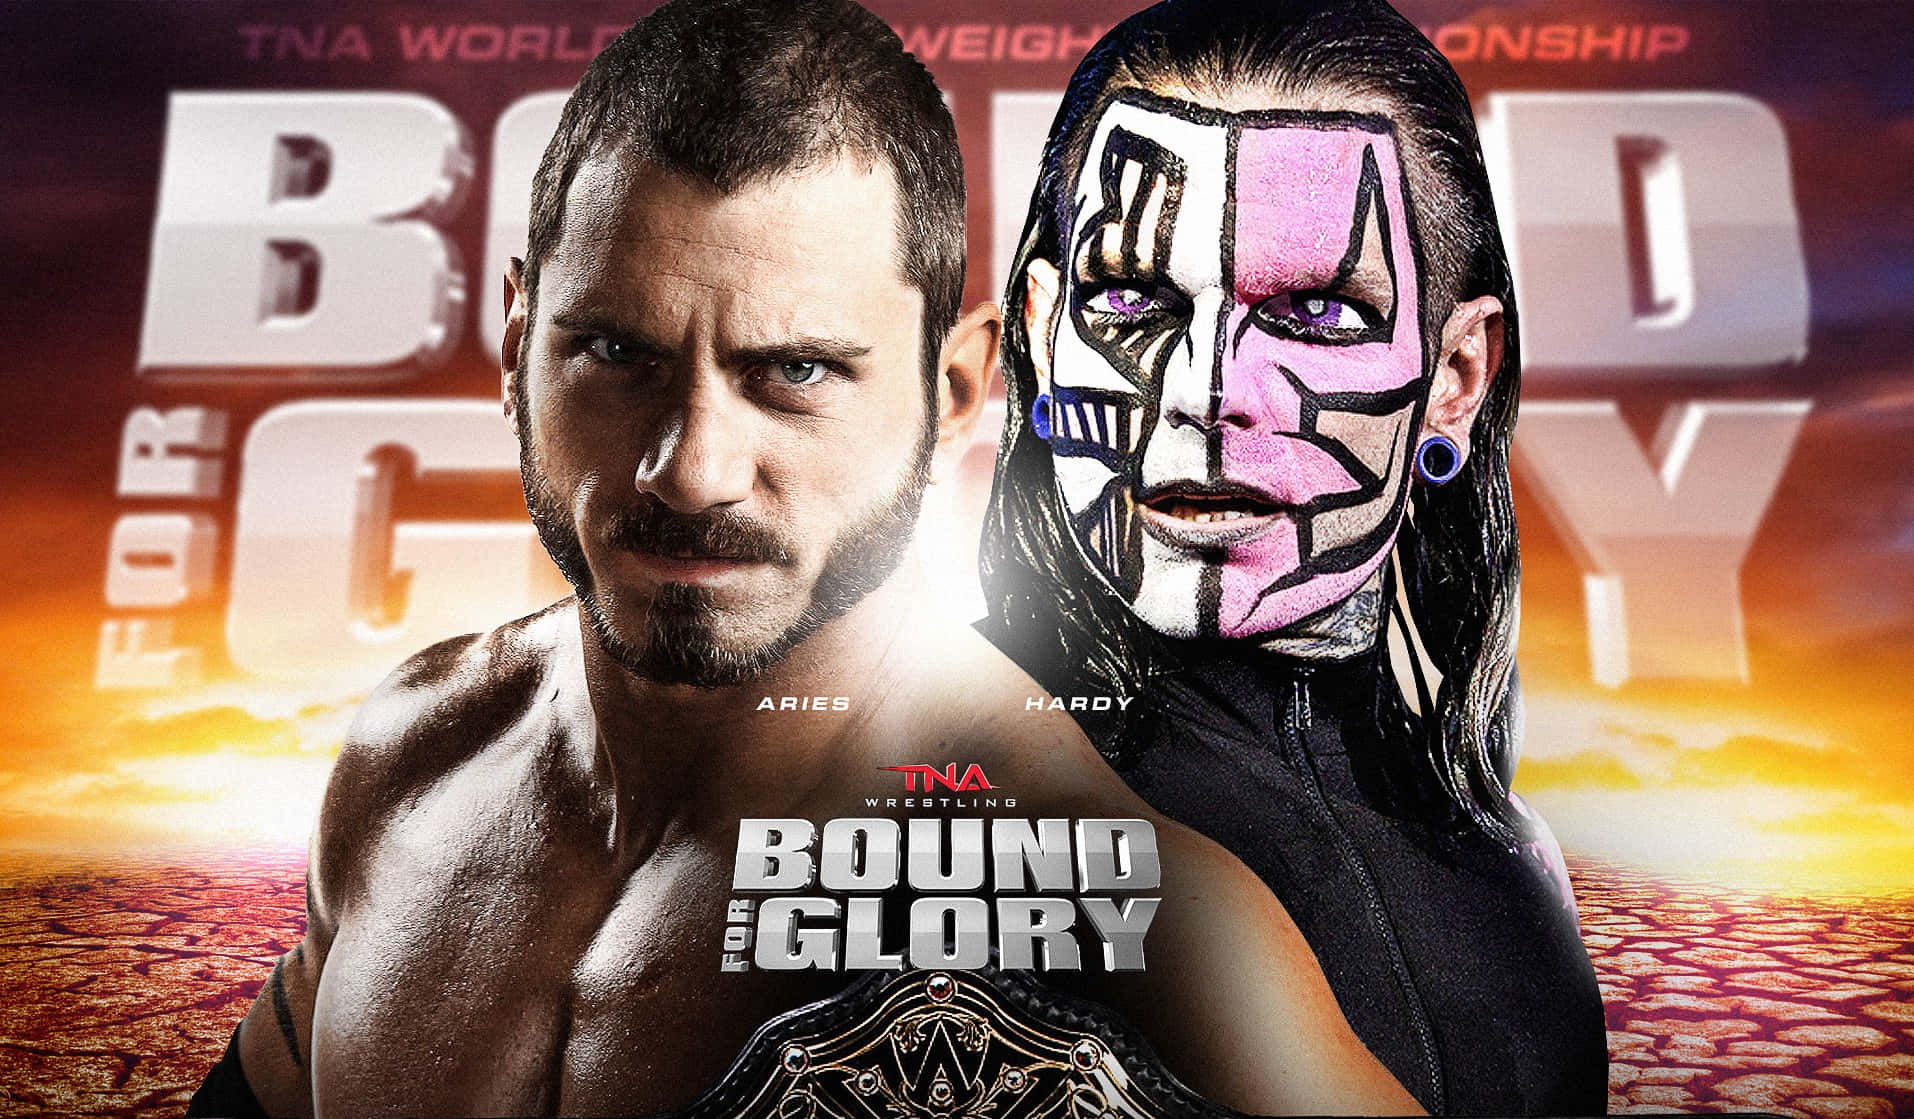 Jeff Hardy And Austin Aries For Bound Glory